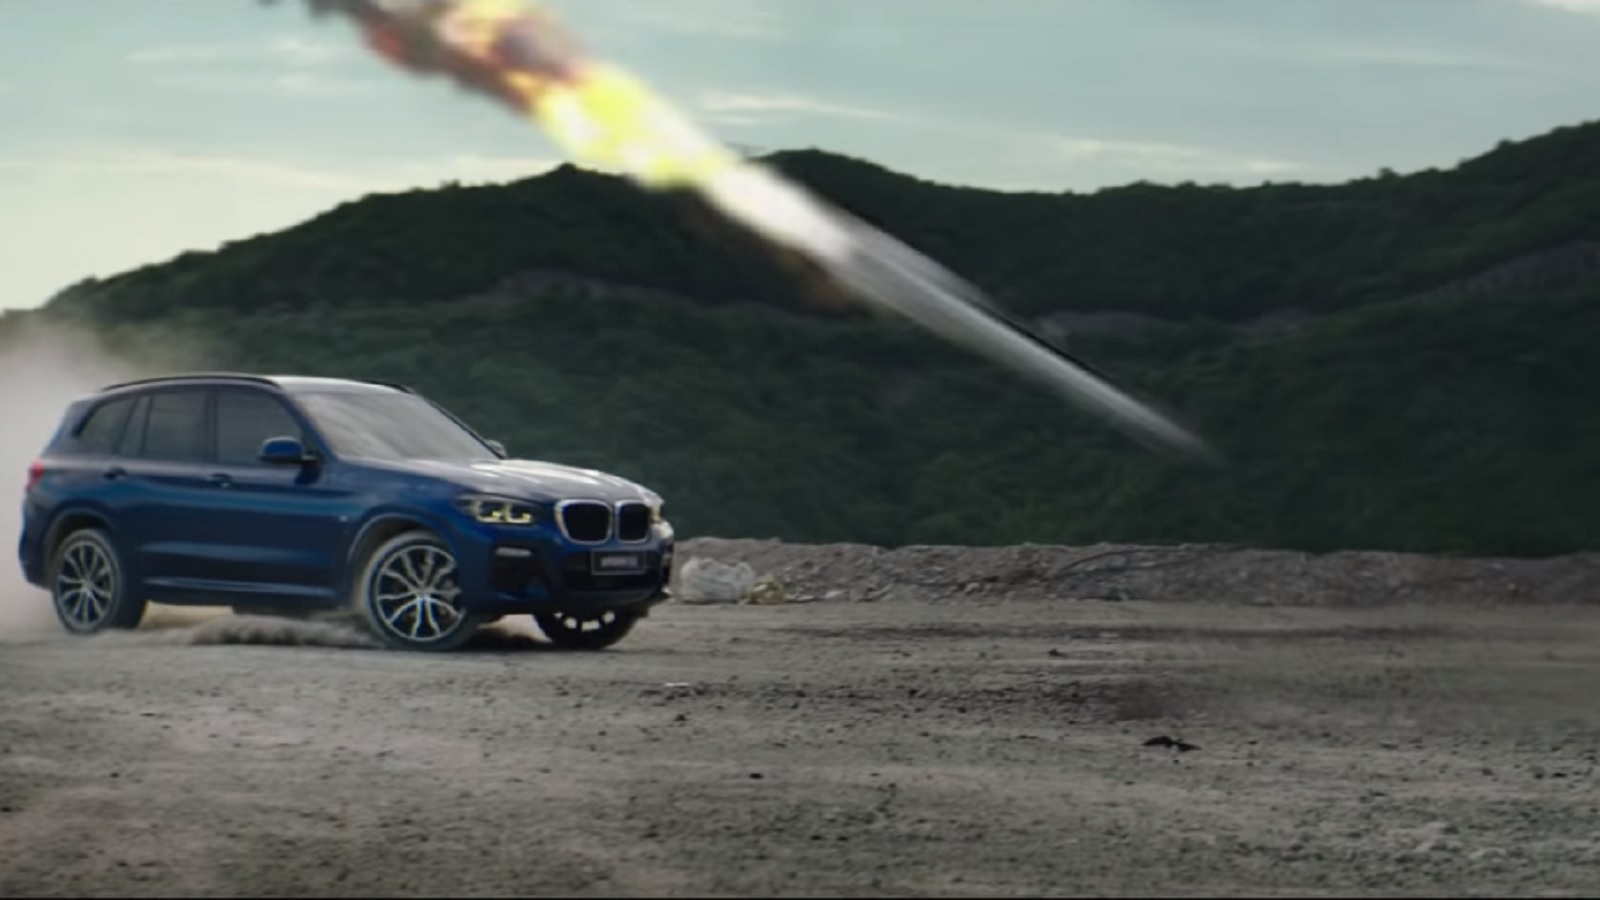 Cool Heroes Don’t Wear Capes. They Drive BMW!